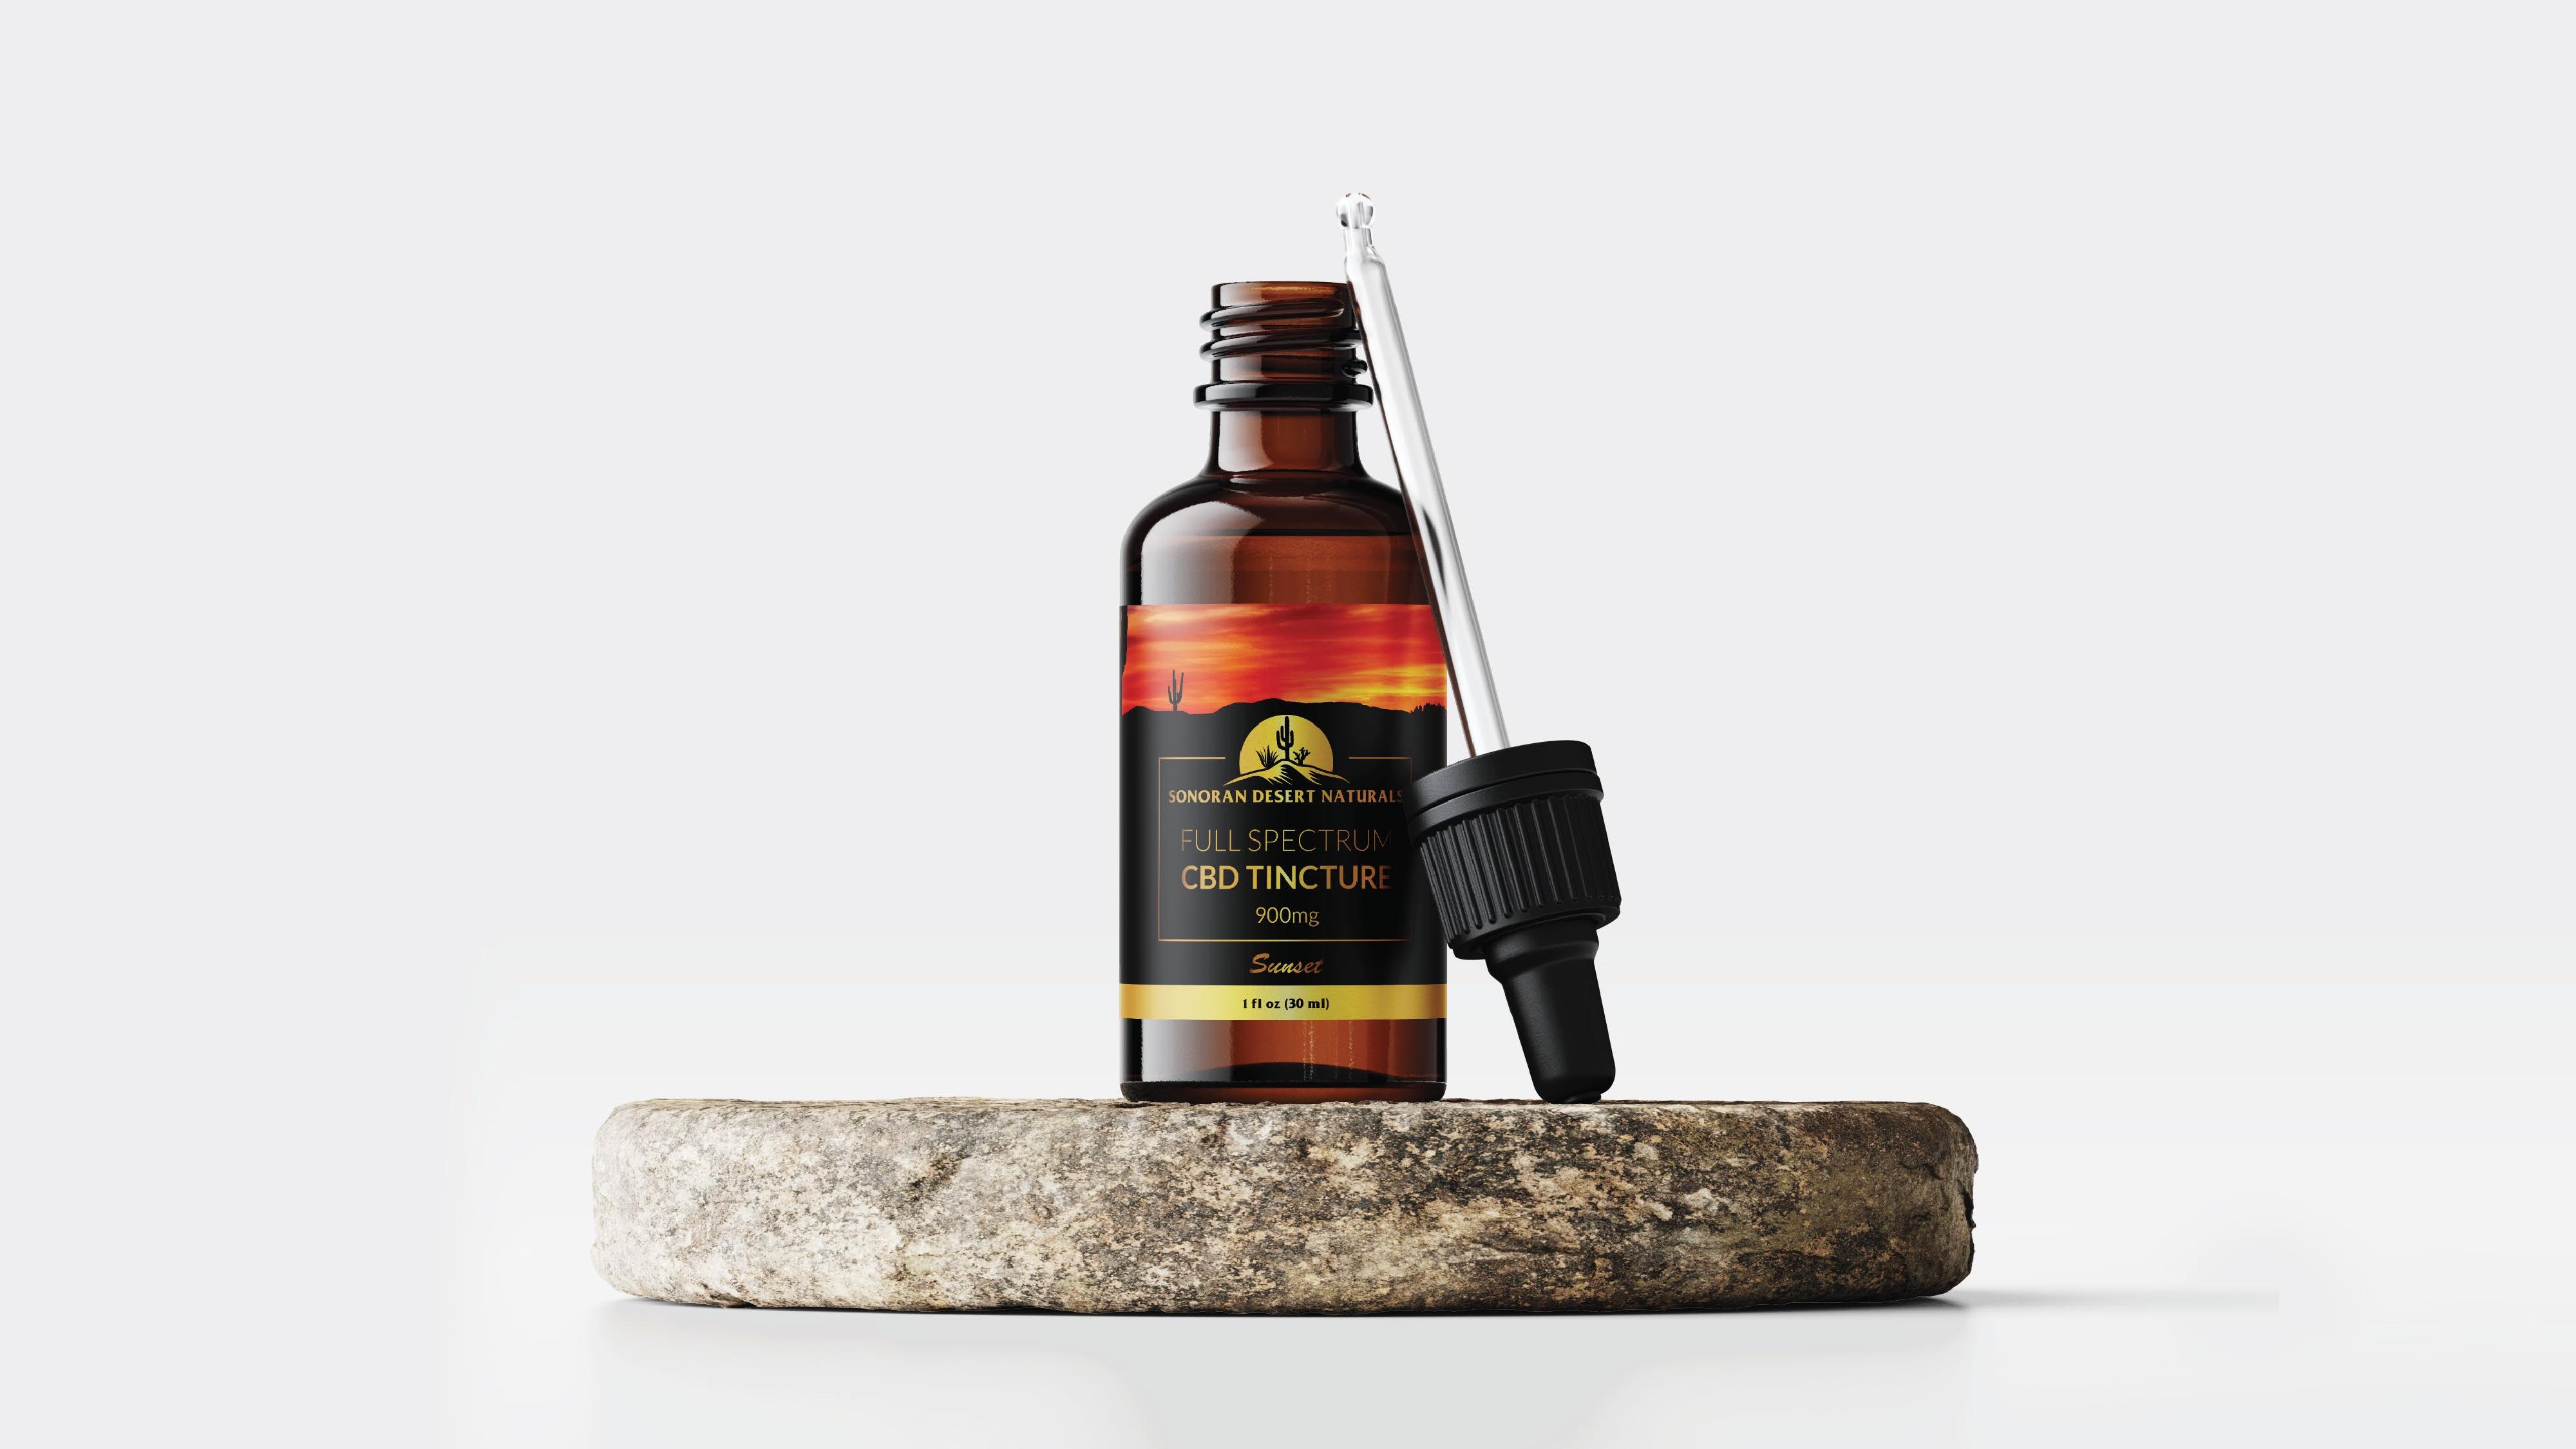 featured image two:Sonoran Desert Naturals Product Line